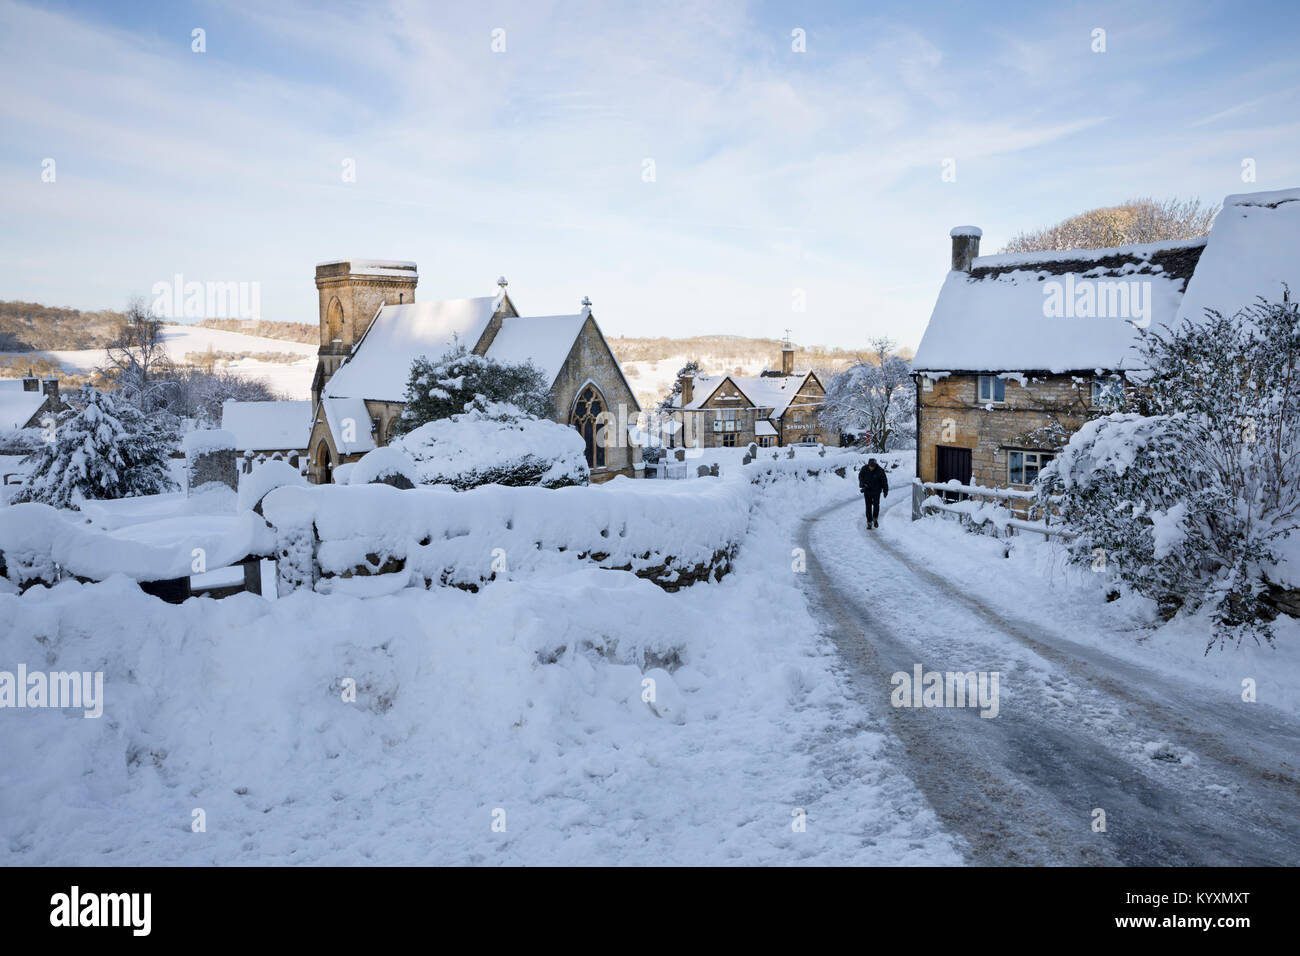 St Barnabas Church and cotswold village in winter snow, Snowshill, Cotswolds, Gloucestershire, England, United Kingdom, Europe Stock Photo